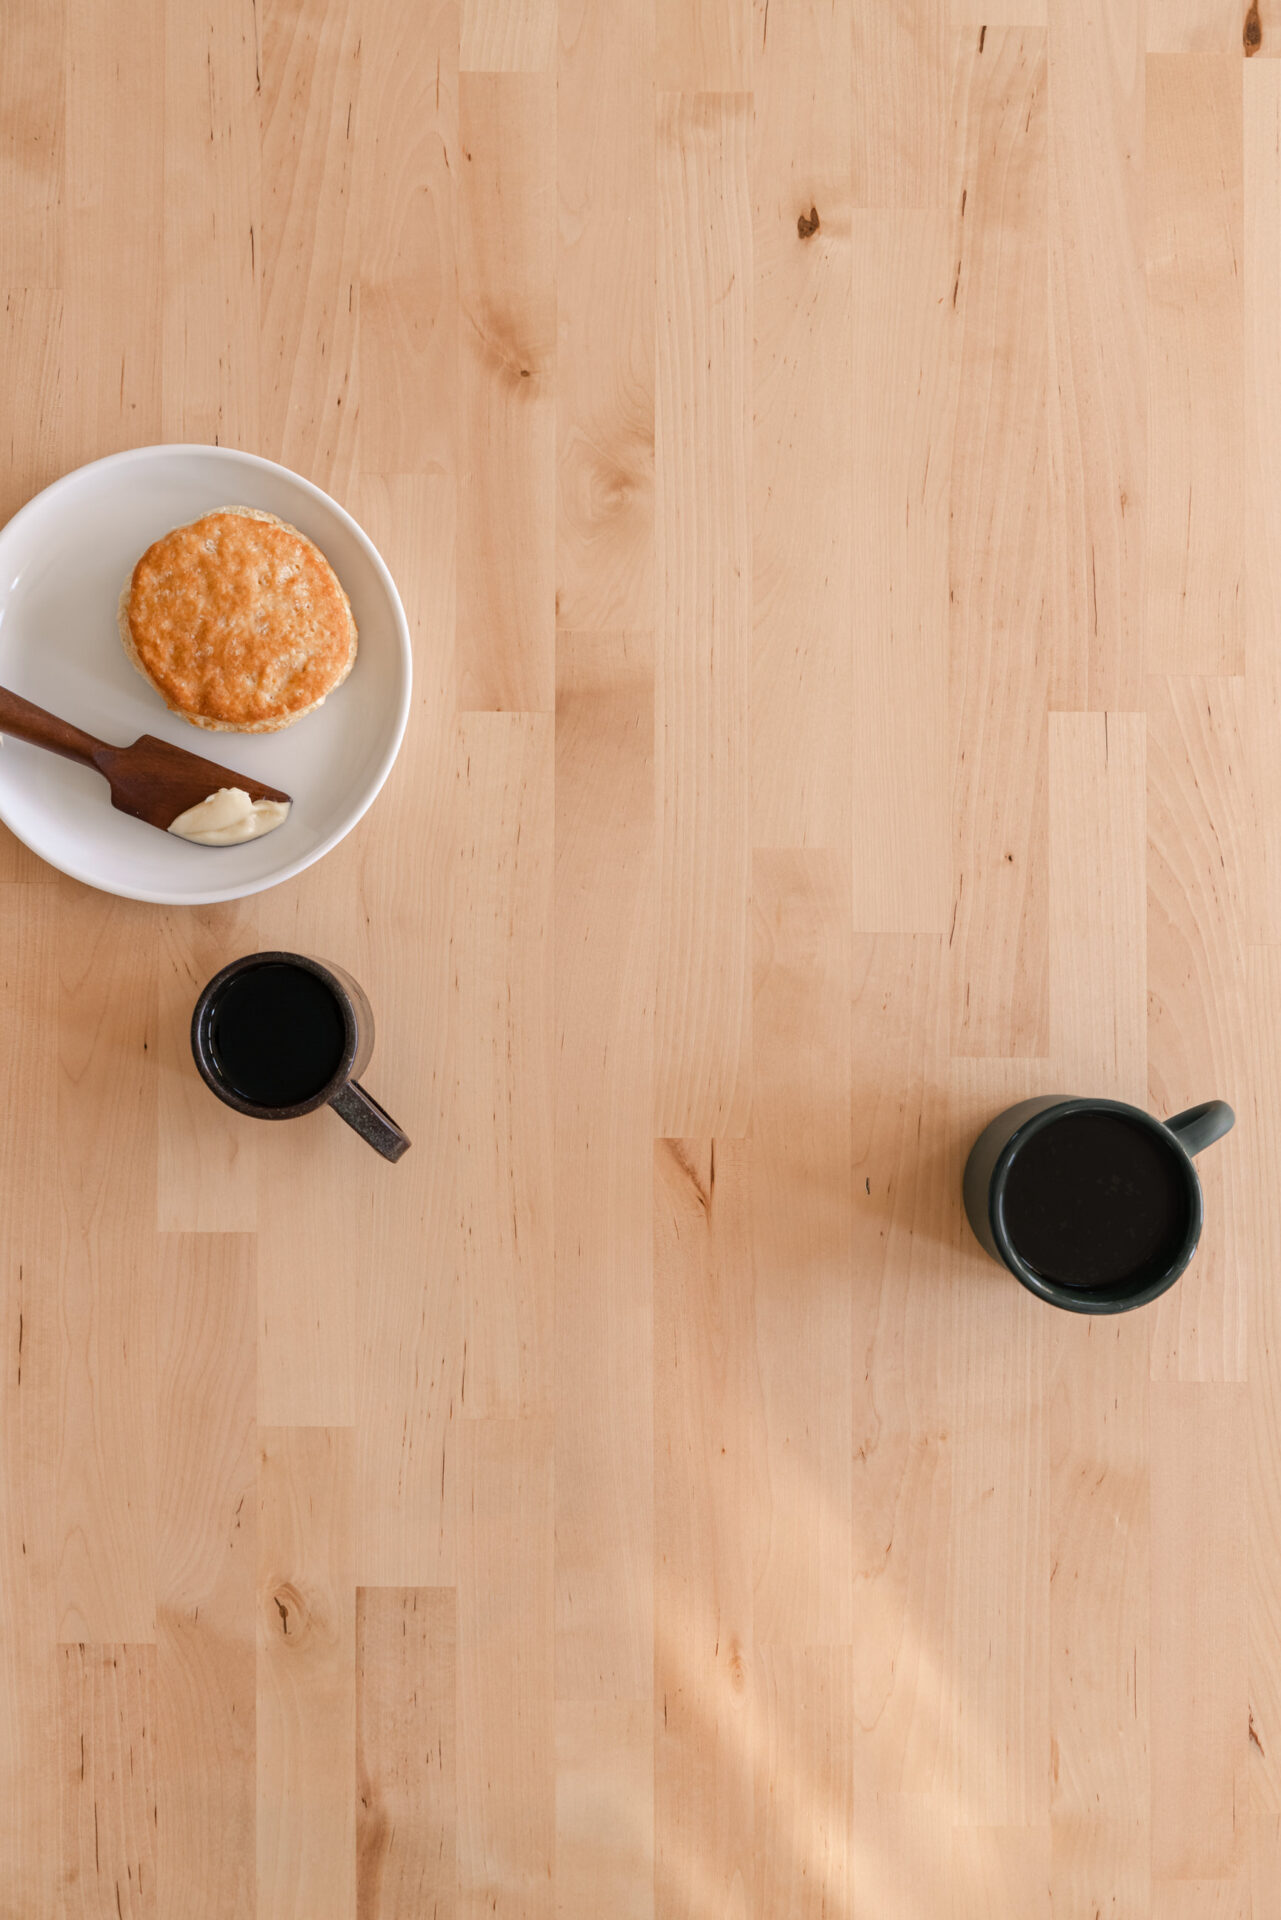 A light wood table with coffee and breakfast on it and light streaming through